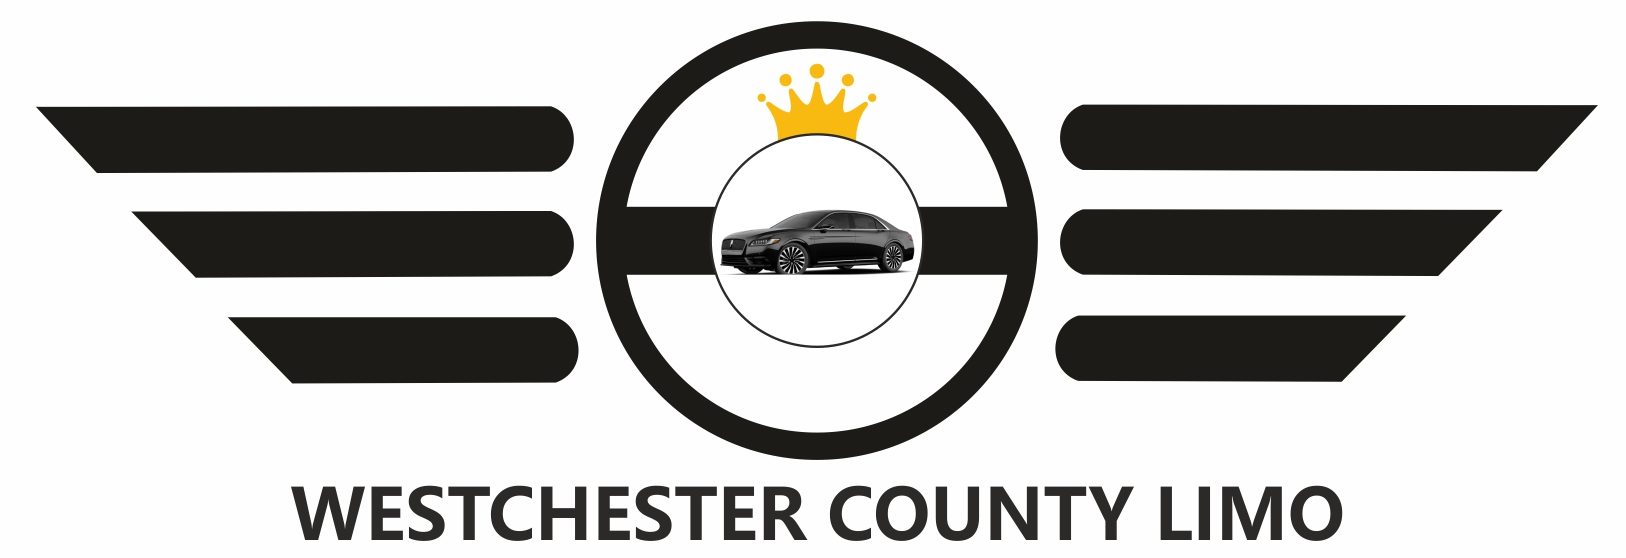 logo Westchester County Limo Service -New York